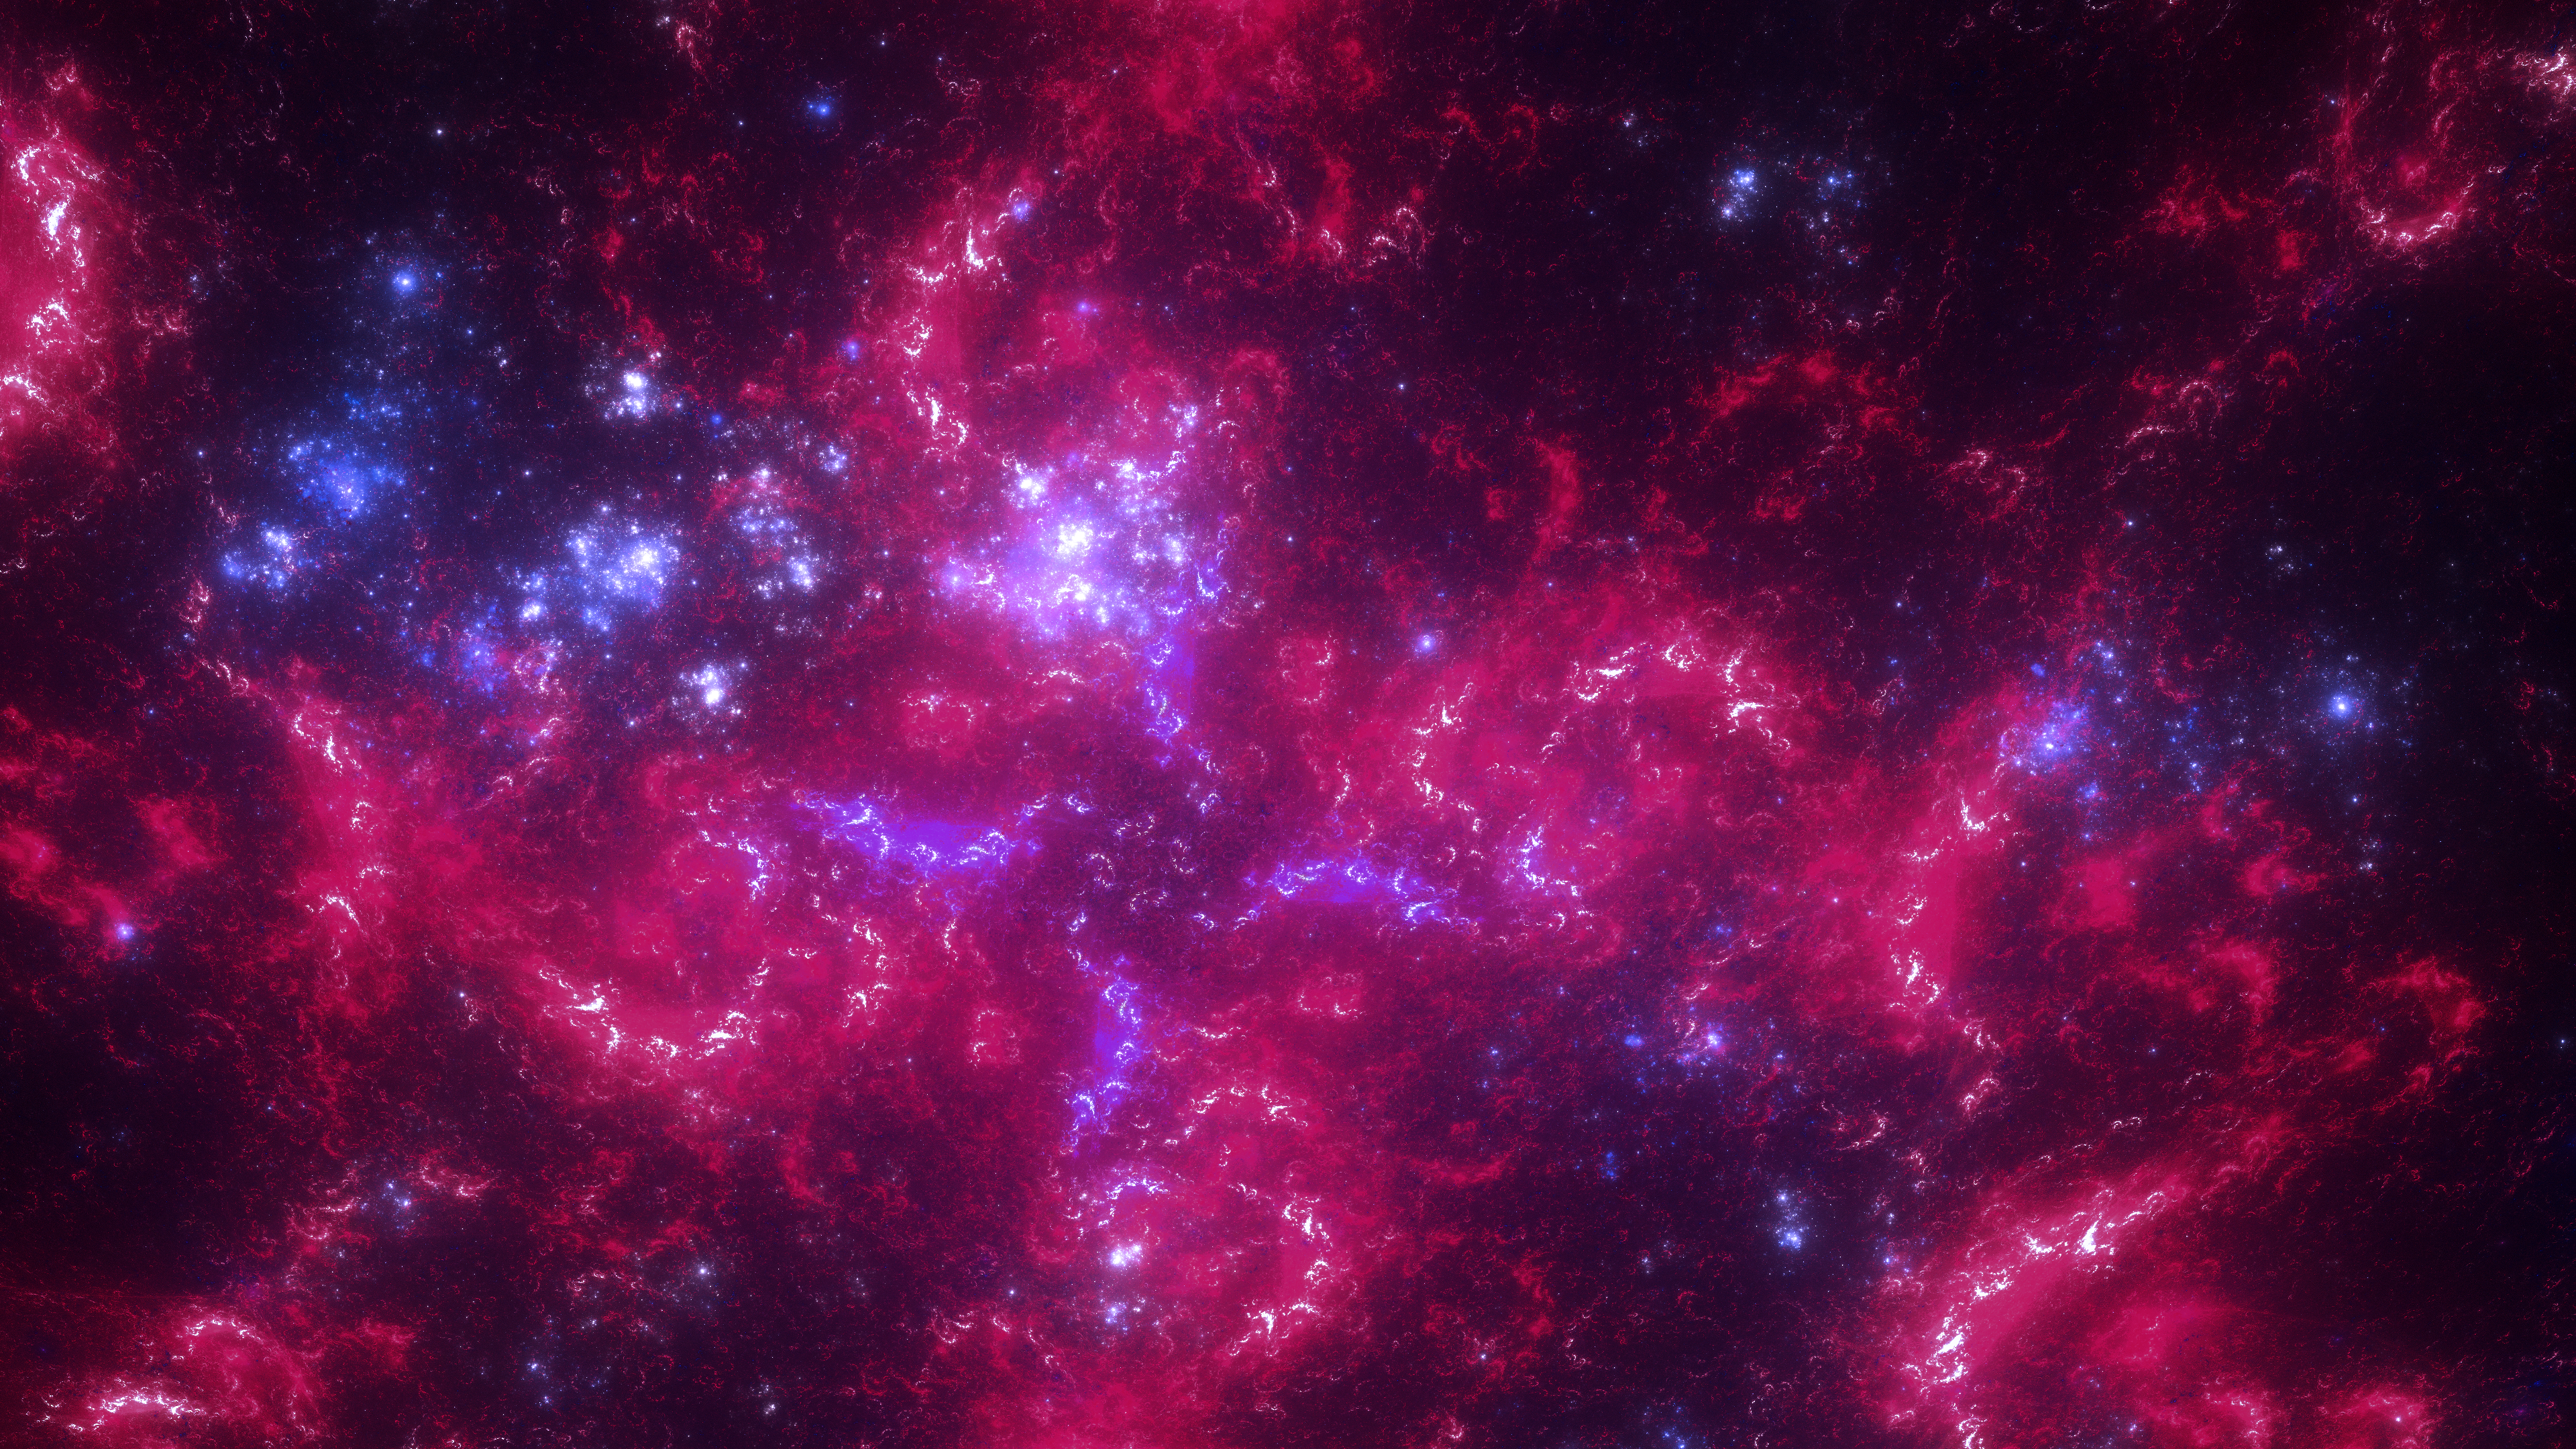 General 3840x2160 nebula space clouds fractal stars space abstract galaxy digital art glowing swirls magenta artificial mathematical fractal collage dreameffect retina @2x chaotica Software Apophysis colorful space art